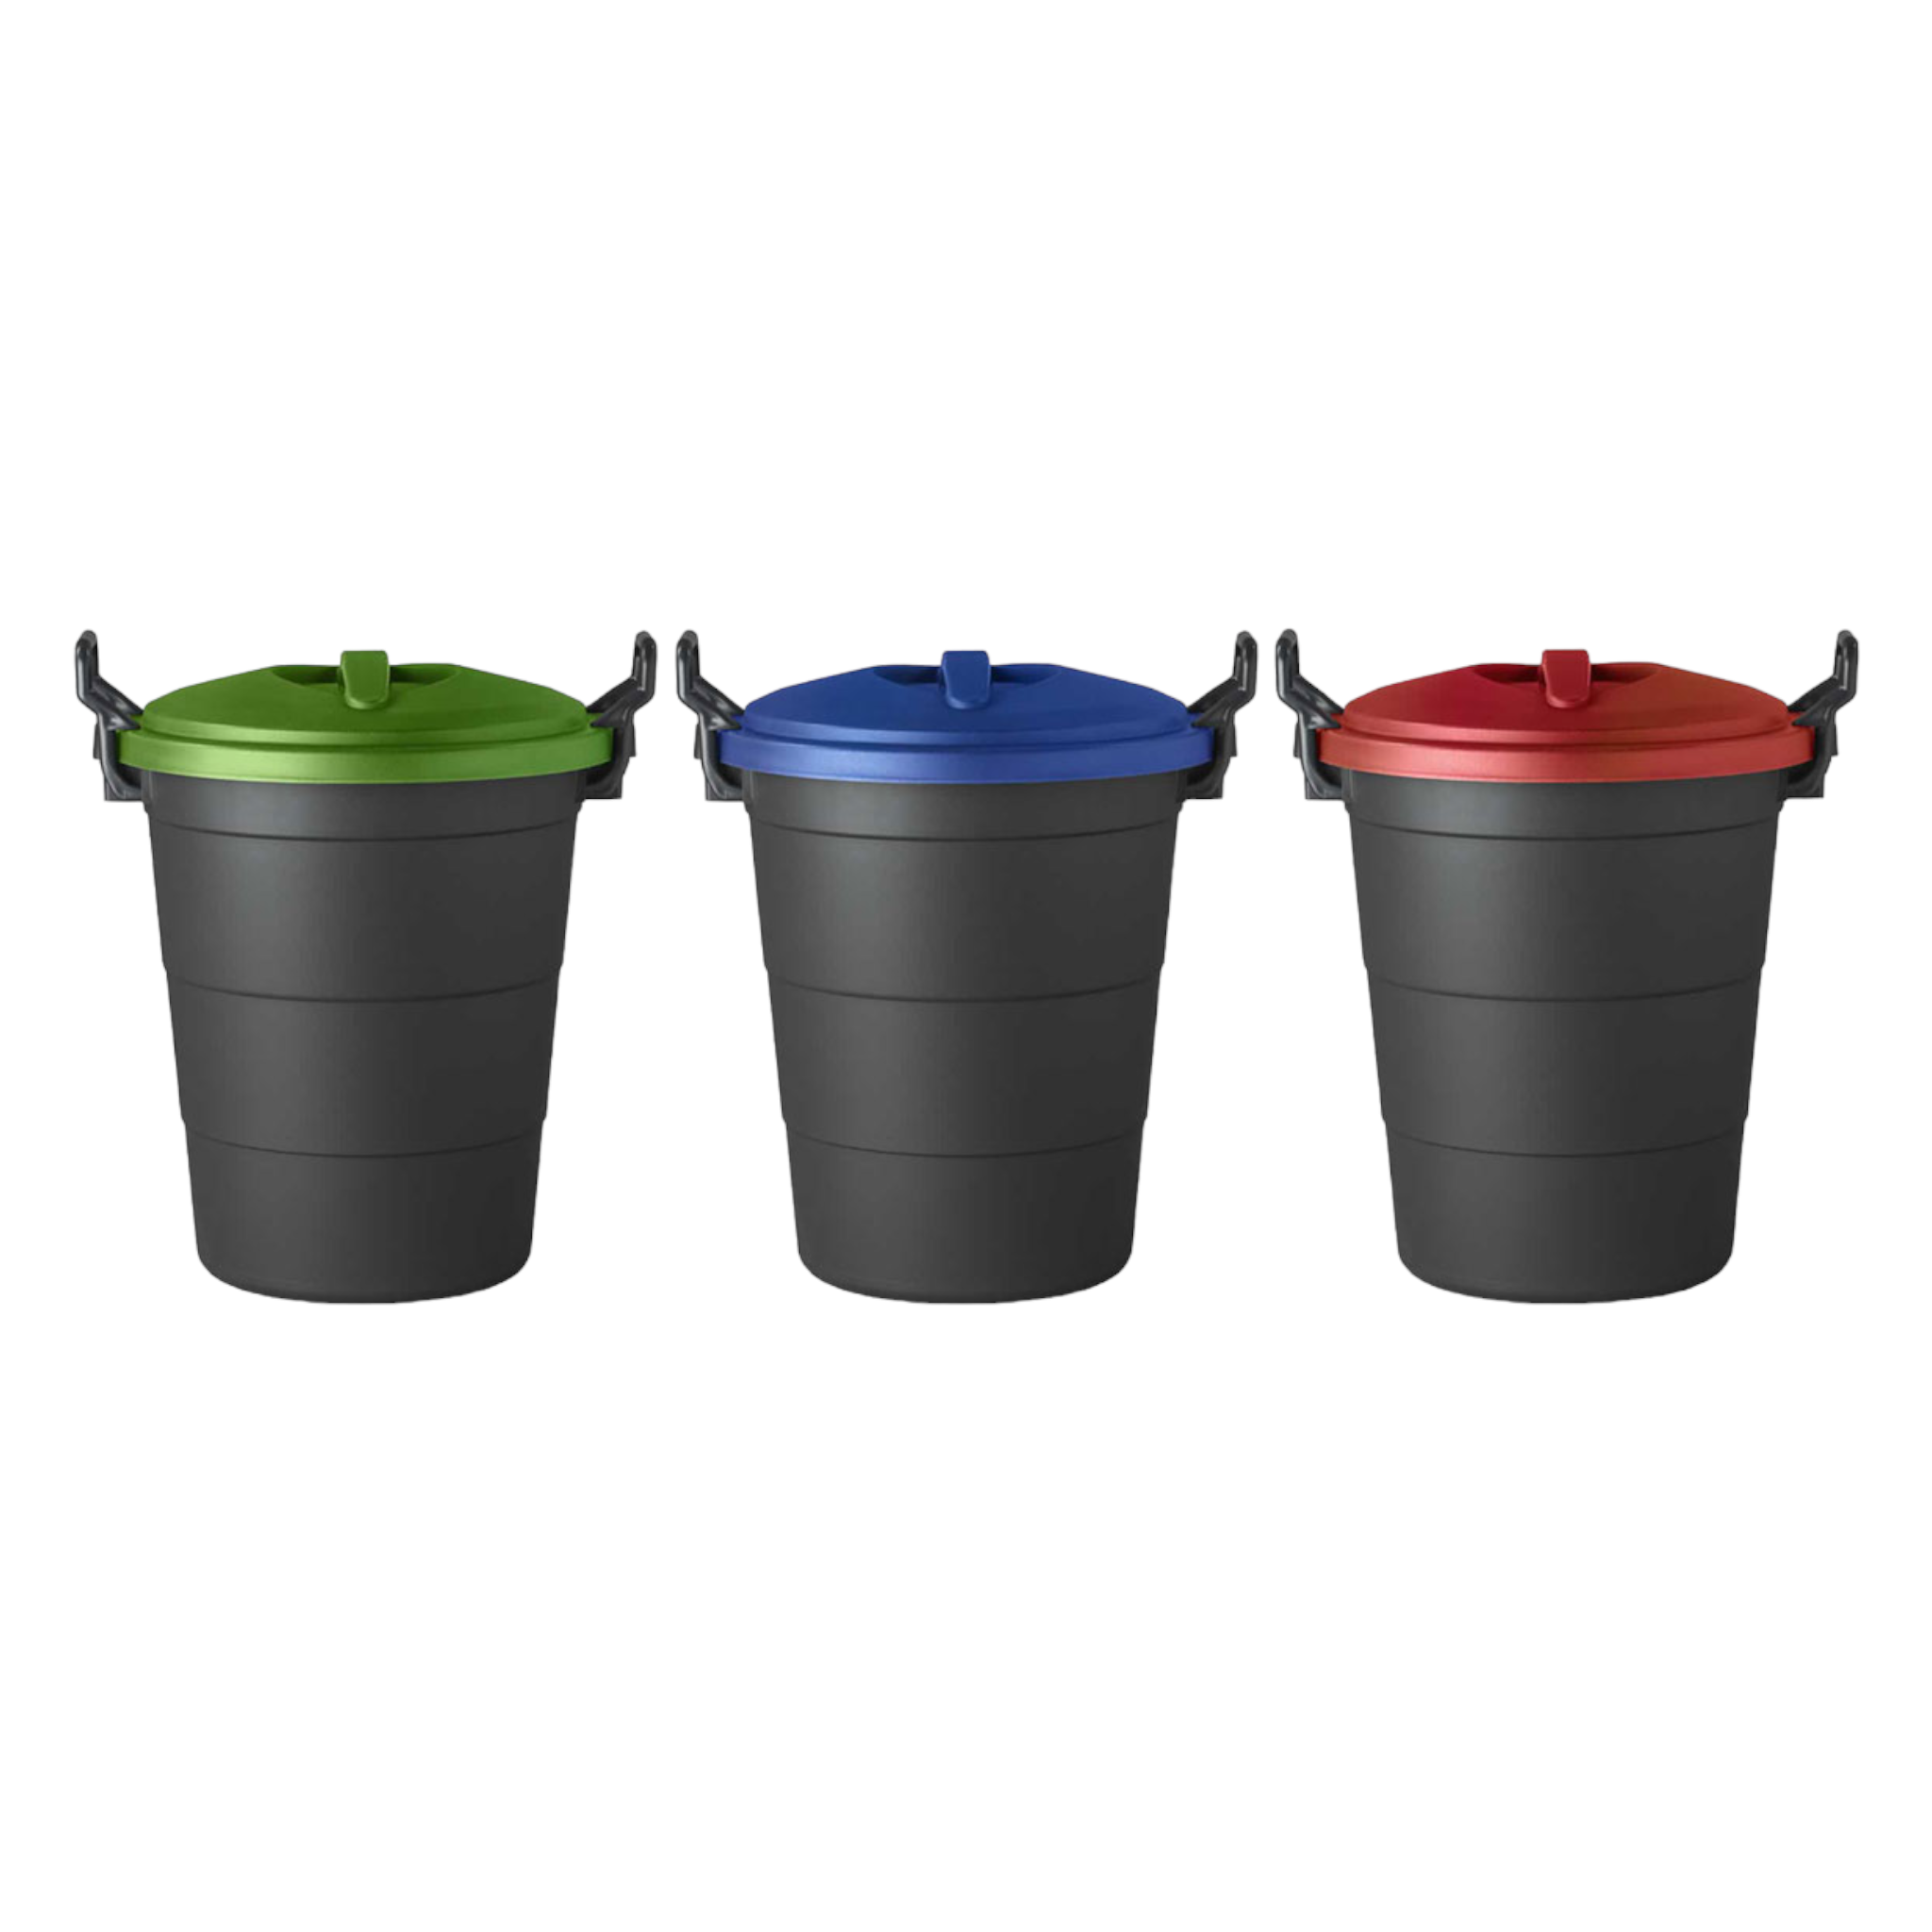 70L Refuse Dustbin 3 Piece Set with Lid Assorted Buzz